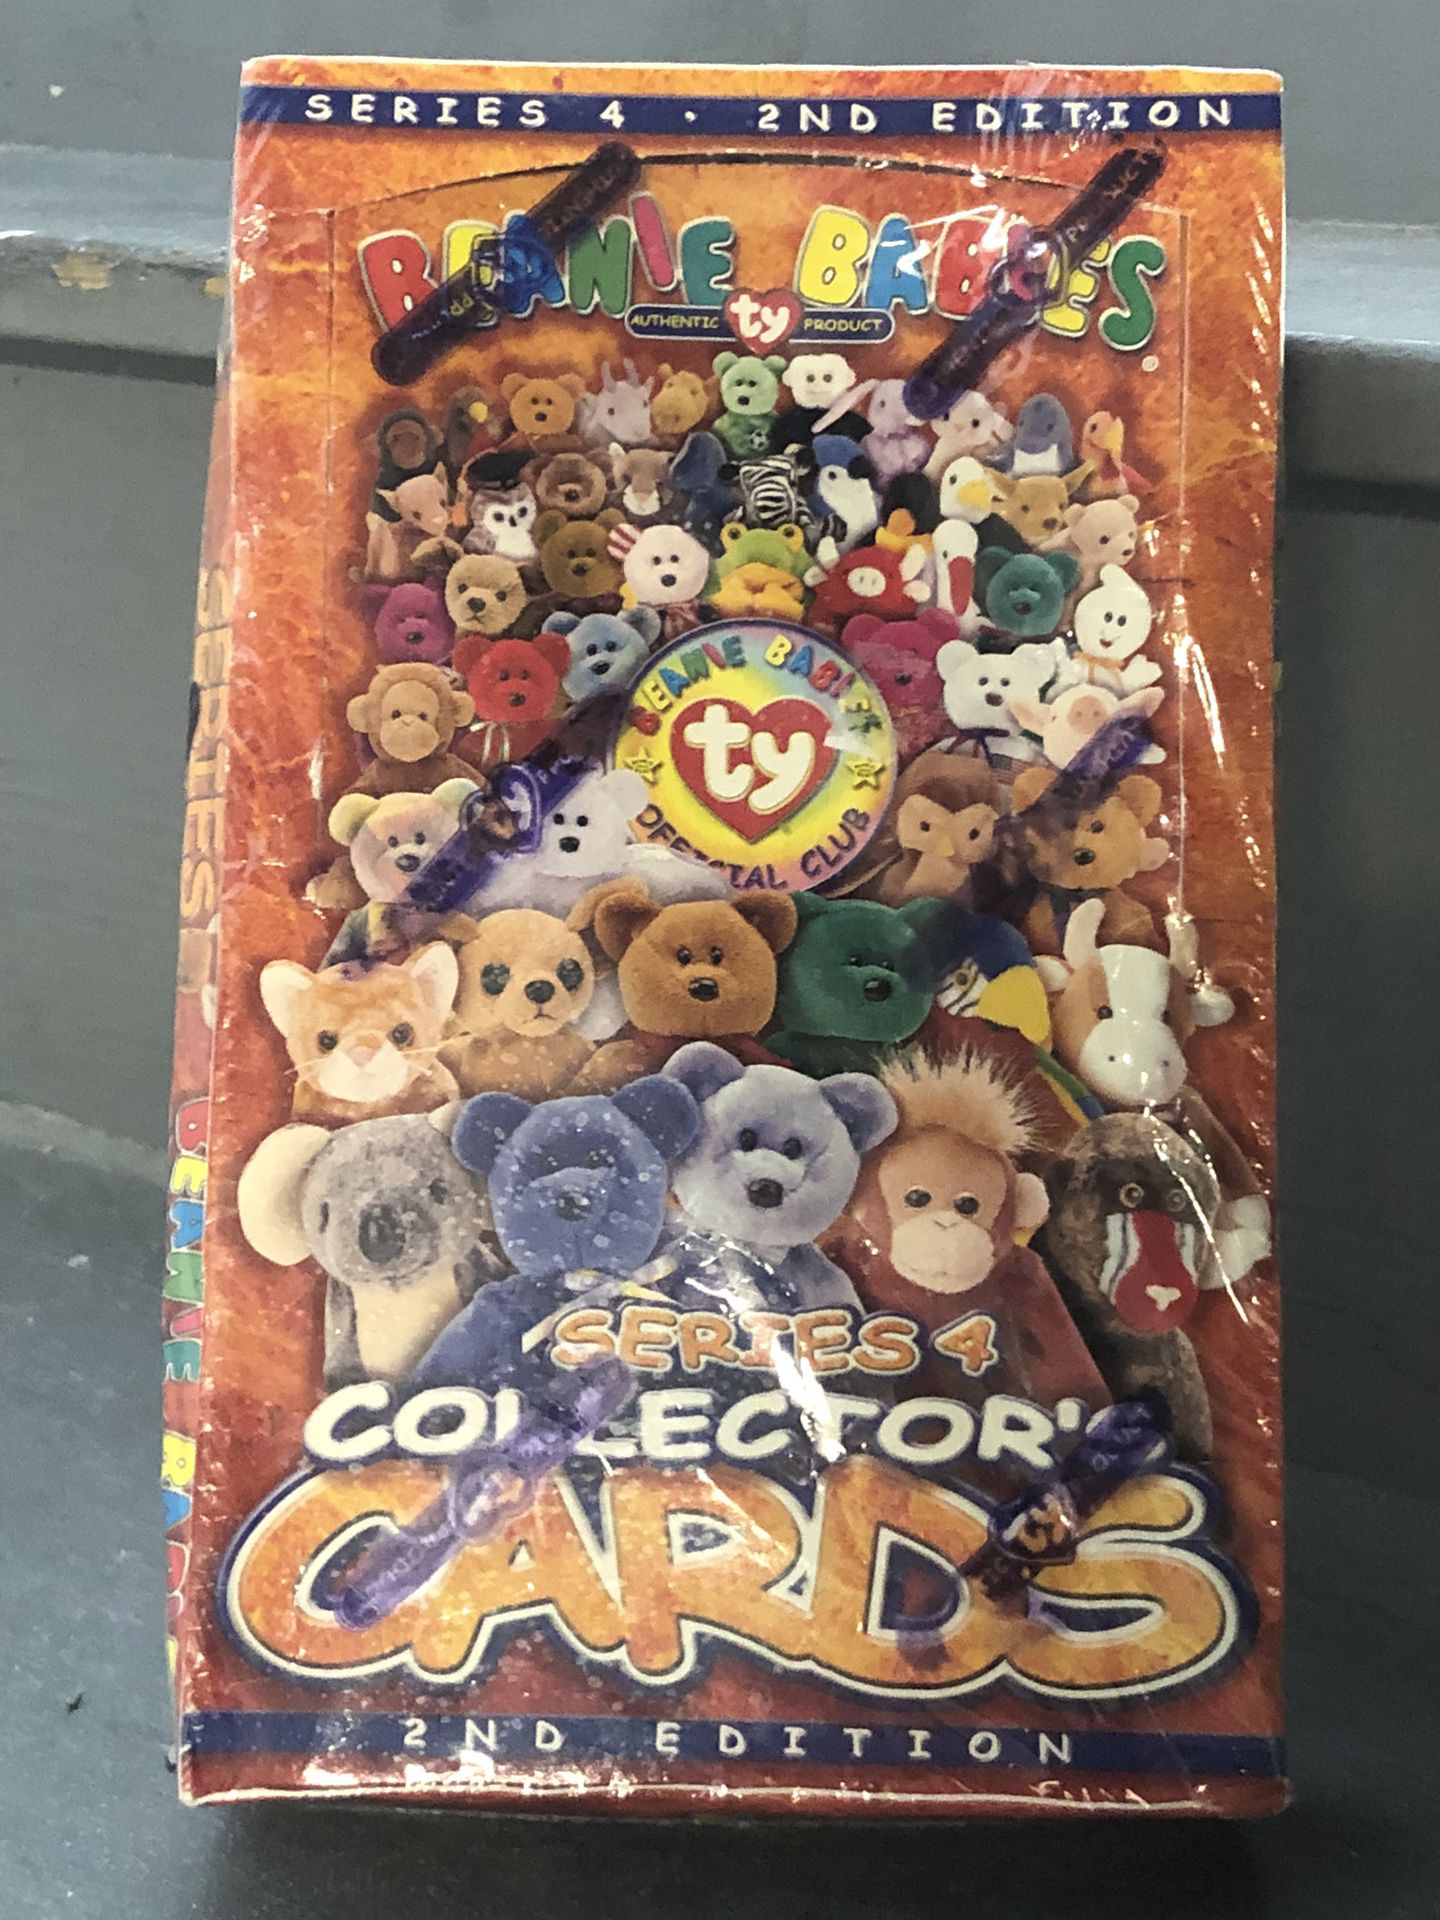 TY Beanie Babies Collectors Card Boxed Set